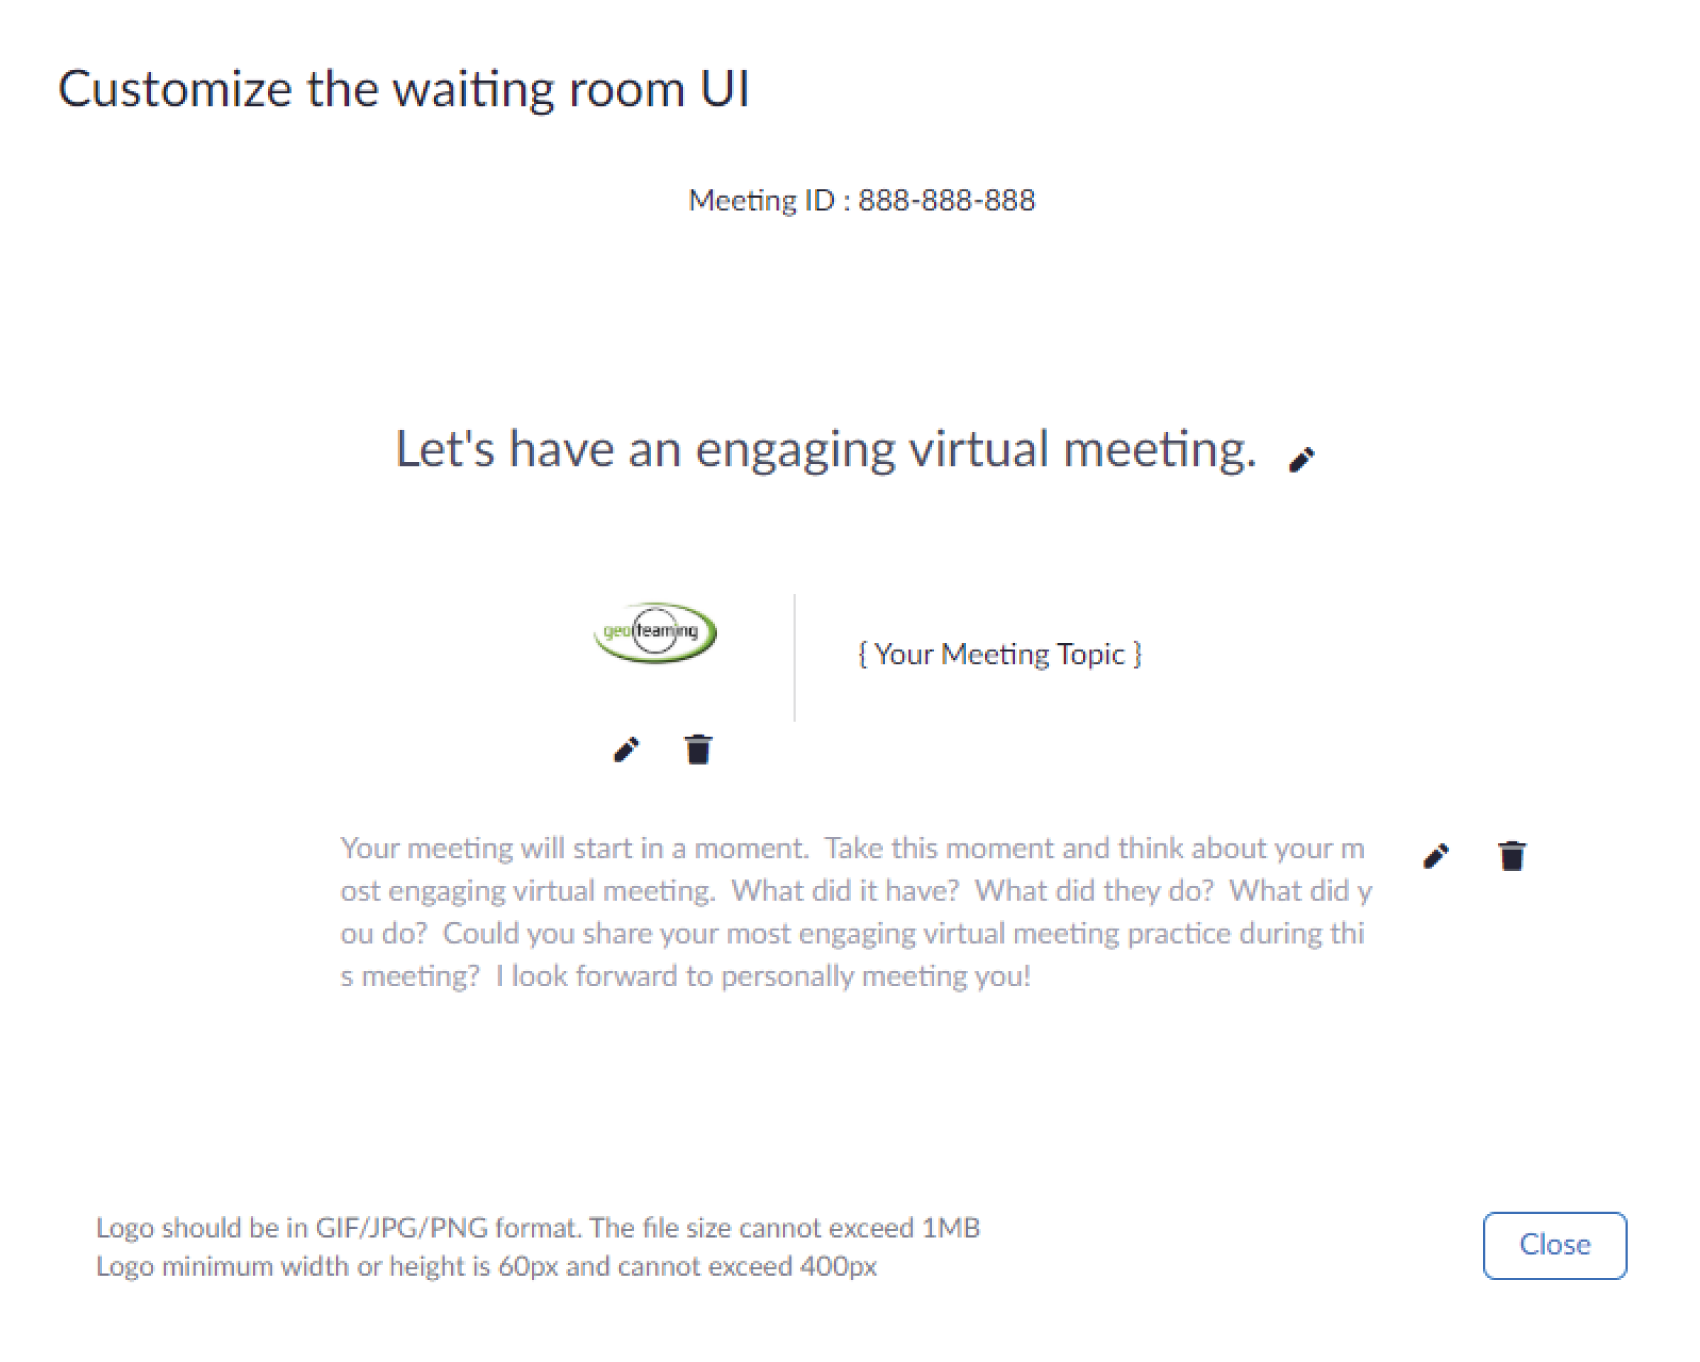 Snapshot of customizing the user interface of the waiting room.